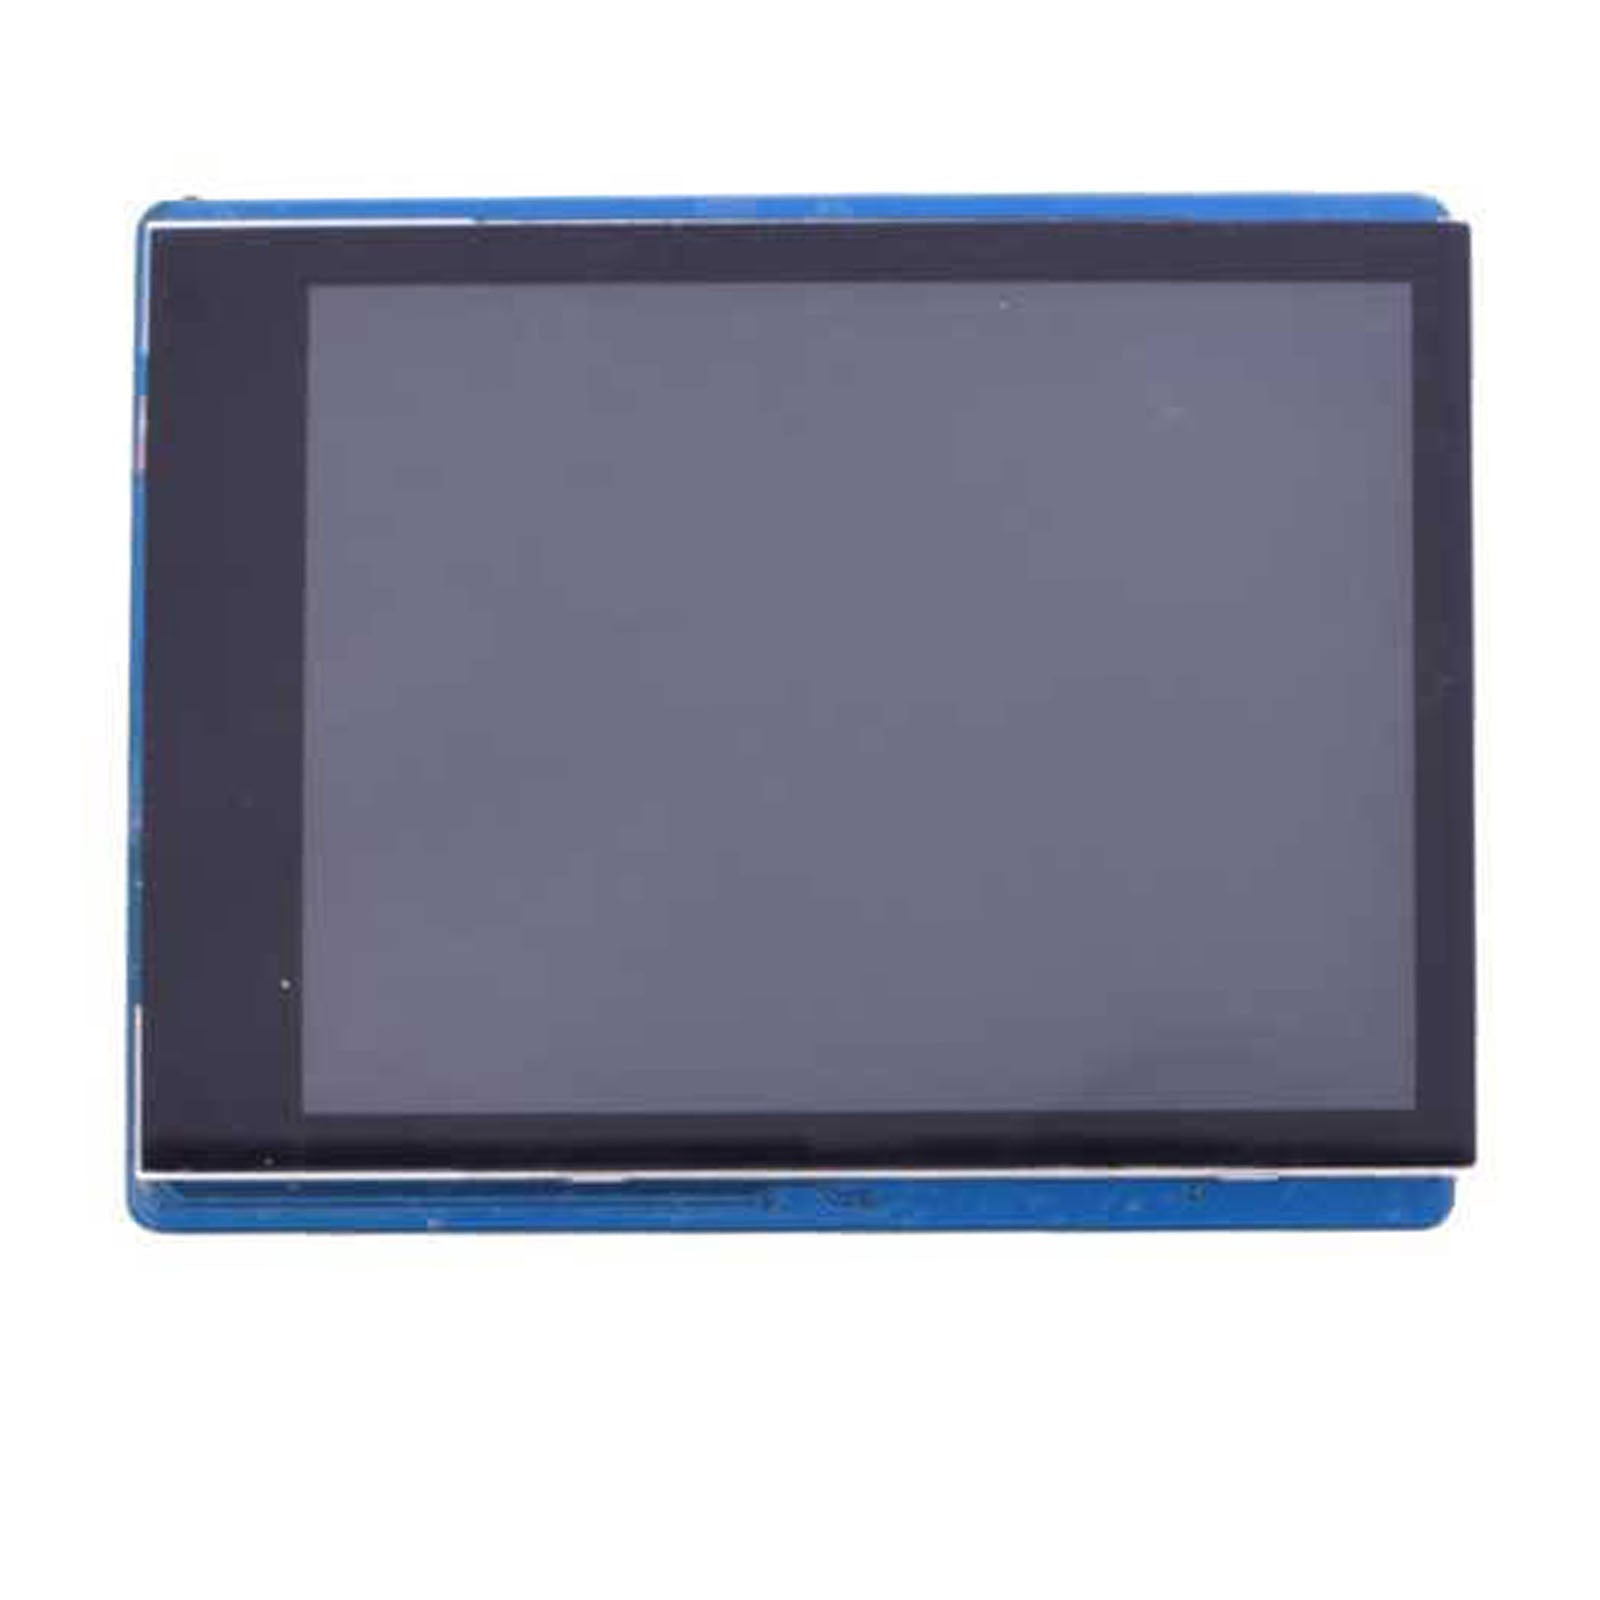 2.8 inch TFT LCD Display Module with 240x320 resolution and capacitive touch capability, designed for Arduino & mbed, utilizing SPI interface and equipped with 4MB Flash